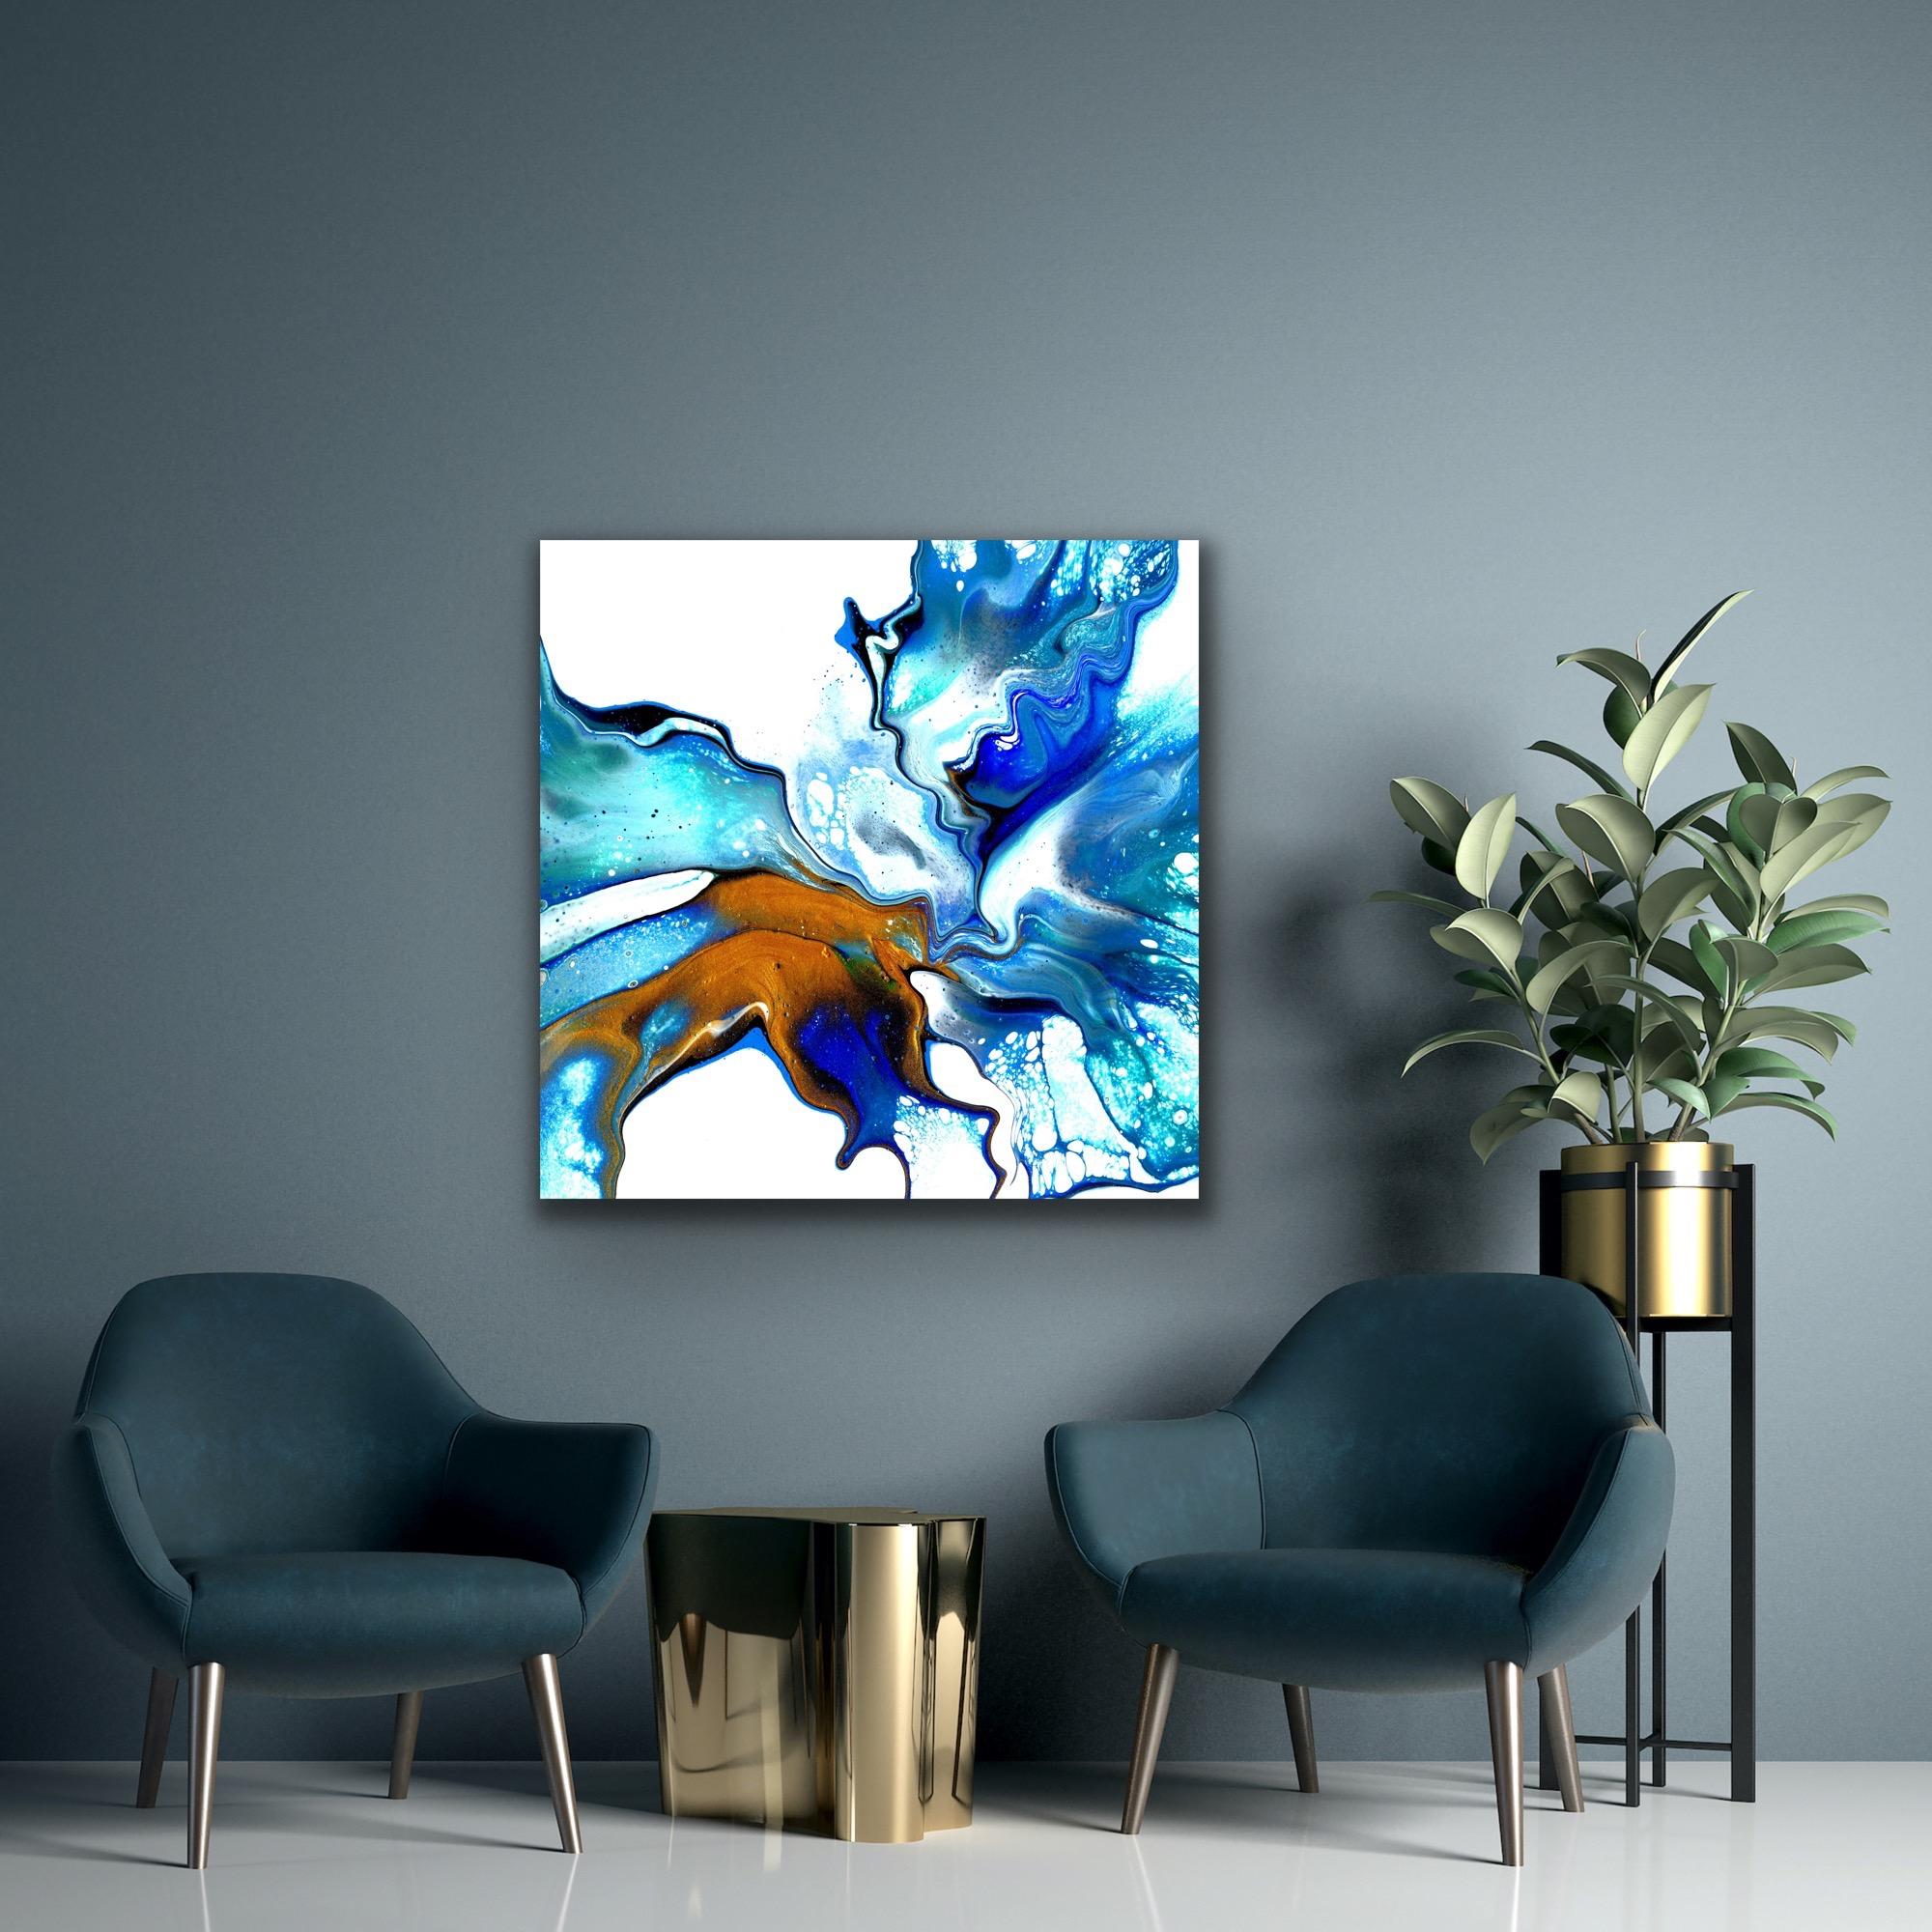 This contemporary modern abstract painting is printed on a lightweight metal composite and comes ready to hang. This vibrant composition can be hung both indoor and outdoor as it is weather resistant.

-Title: Displaced
-Artist: Celeste